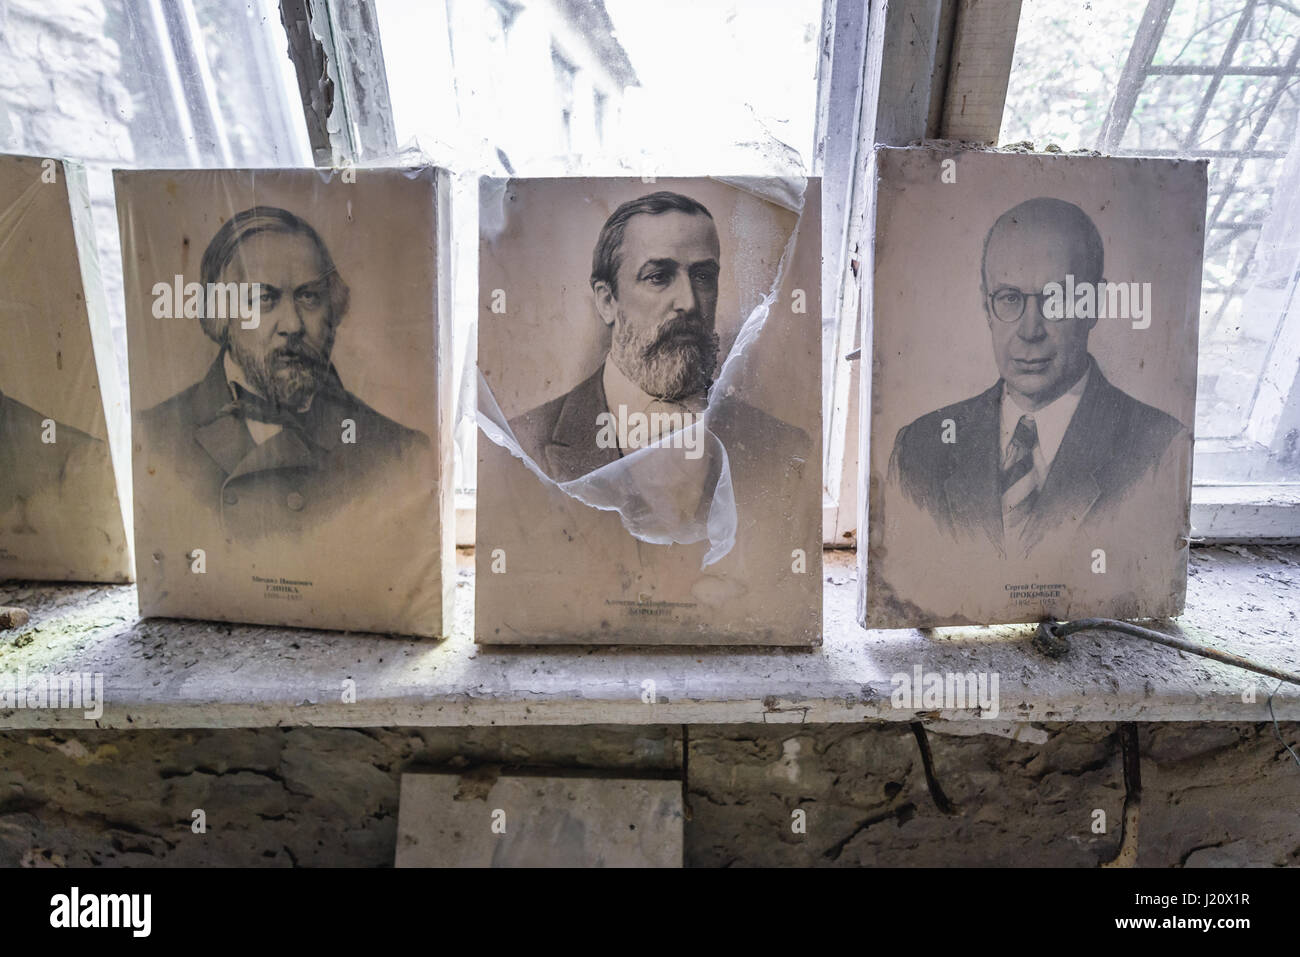 Portraits of Russian composers (Glinka, Borodin and Prokofiev) in abandoned high school of Chernobyl-2 military base, Zone of Alienation in Ukraine Stock Photo